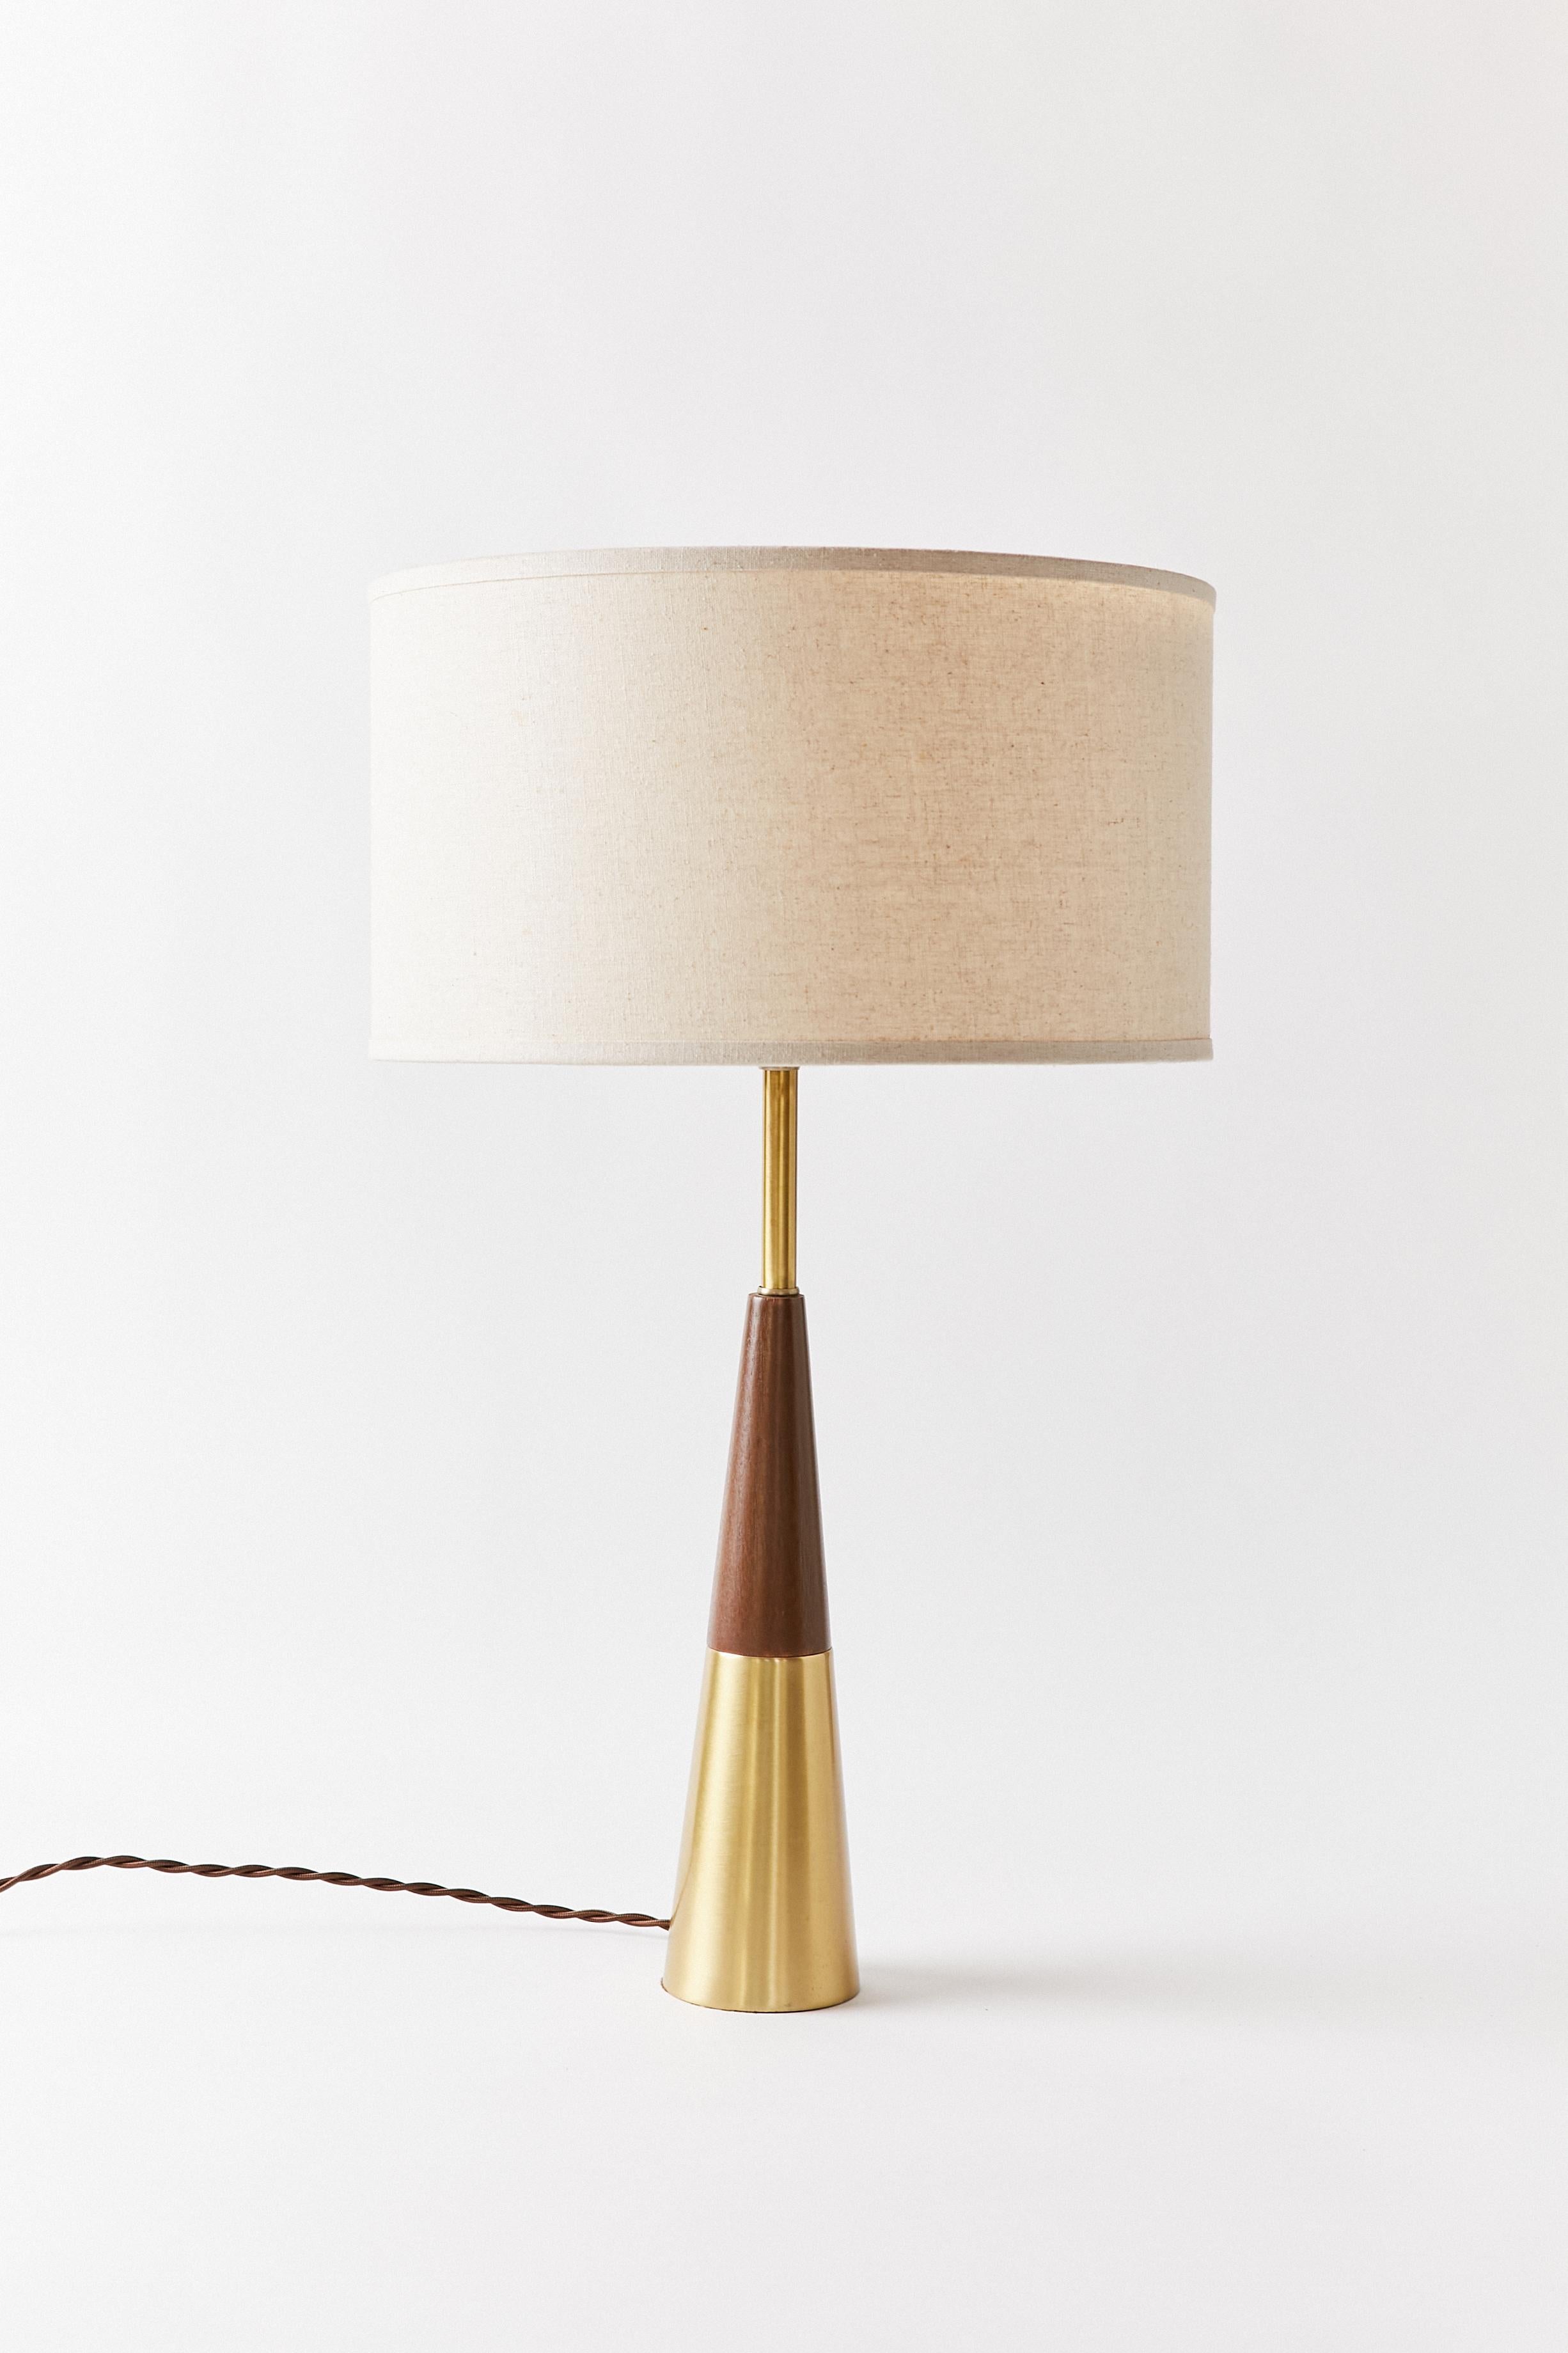 Cone table lamp in Swedish brass and solid walnut. Designed by Tony Paul for Westwood Industries.
This item has been rewired with braided cloth cord and new hardware. This lamp does not include shade or harp.